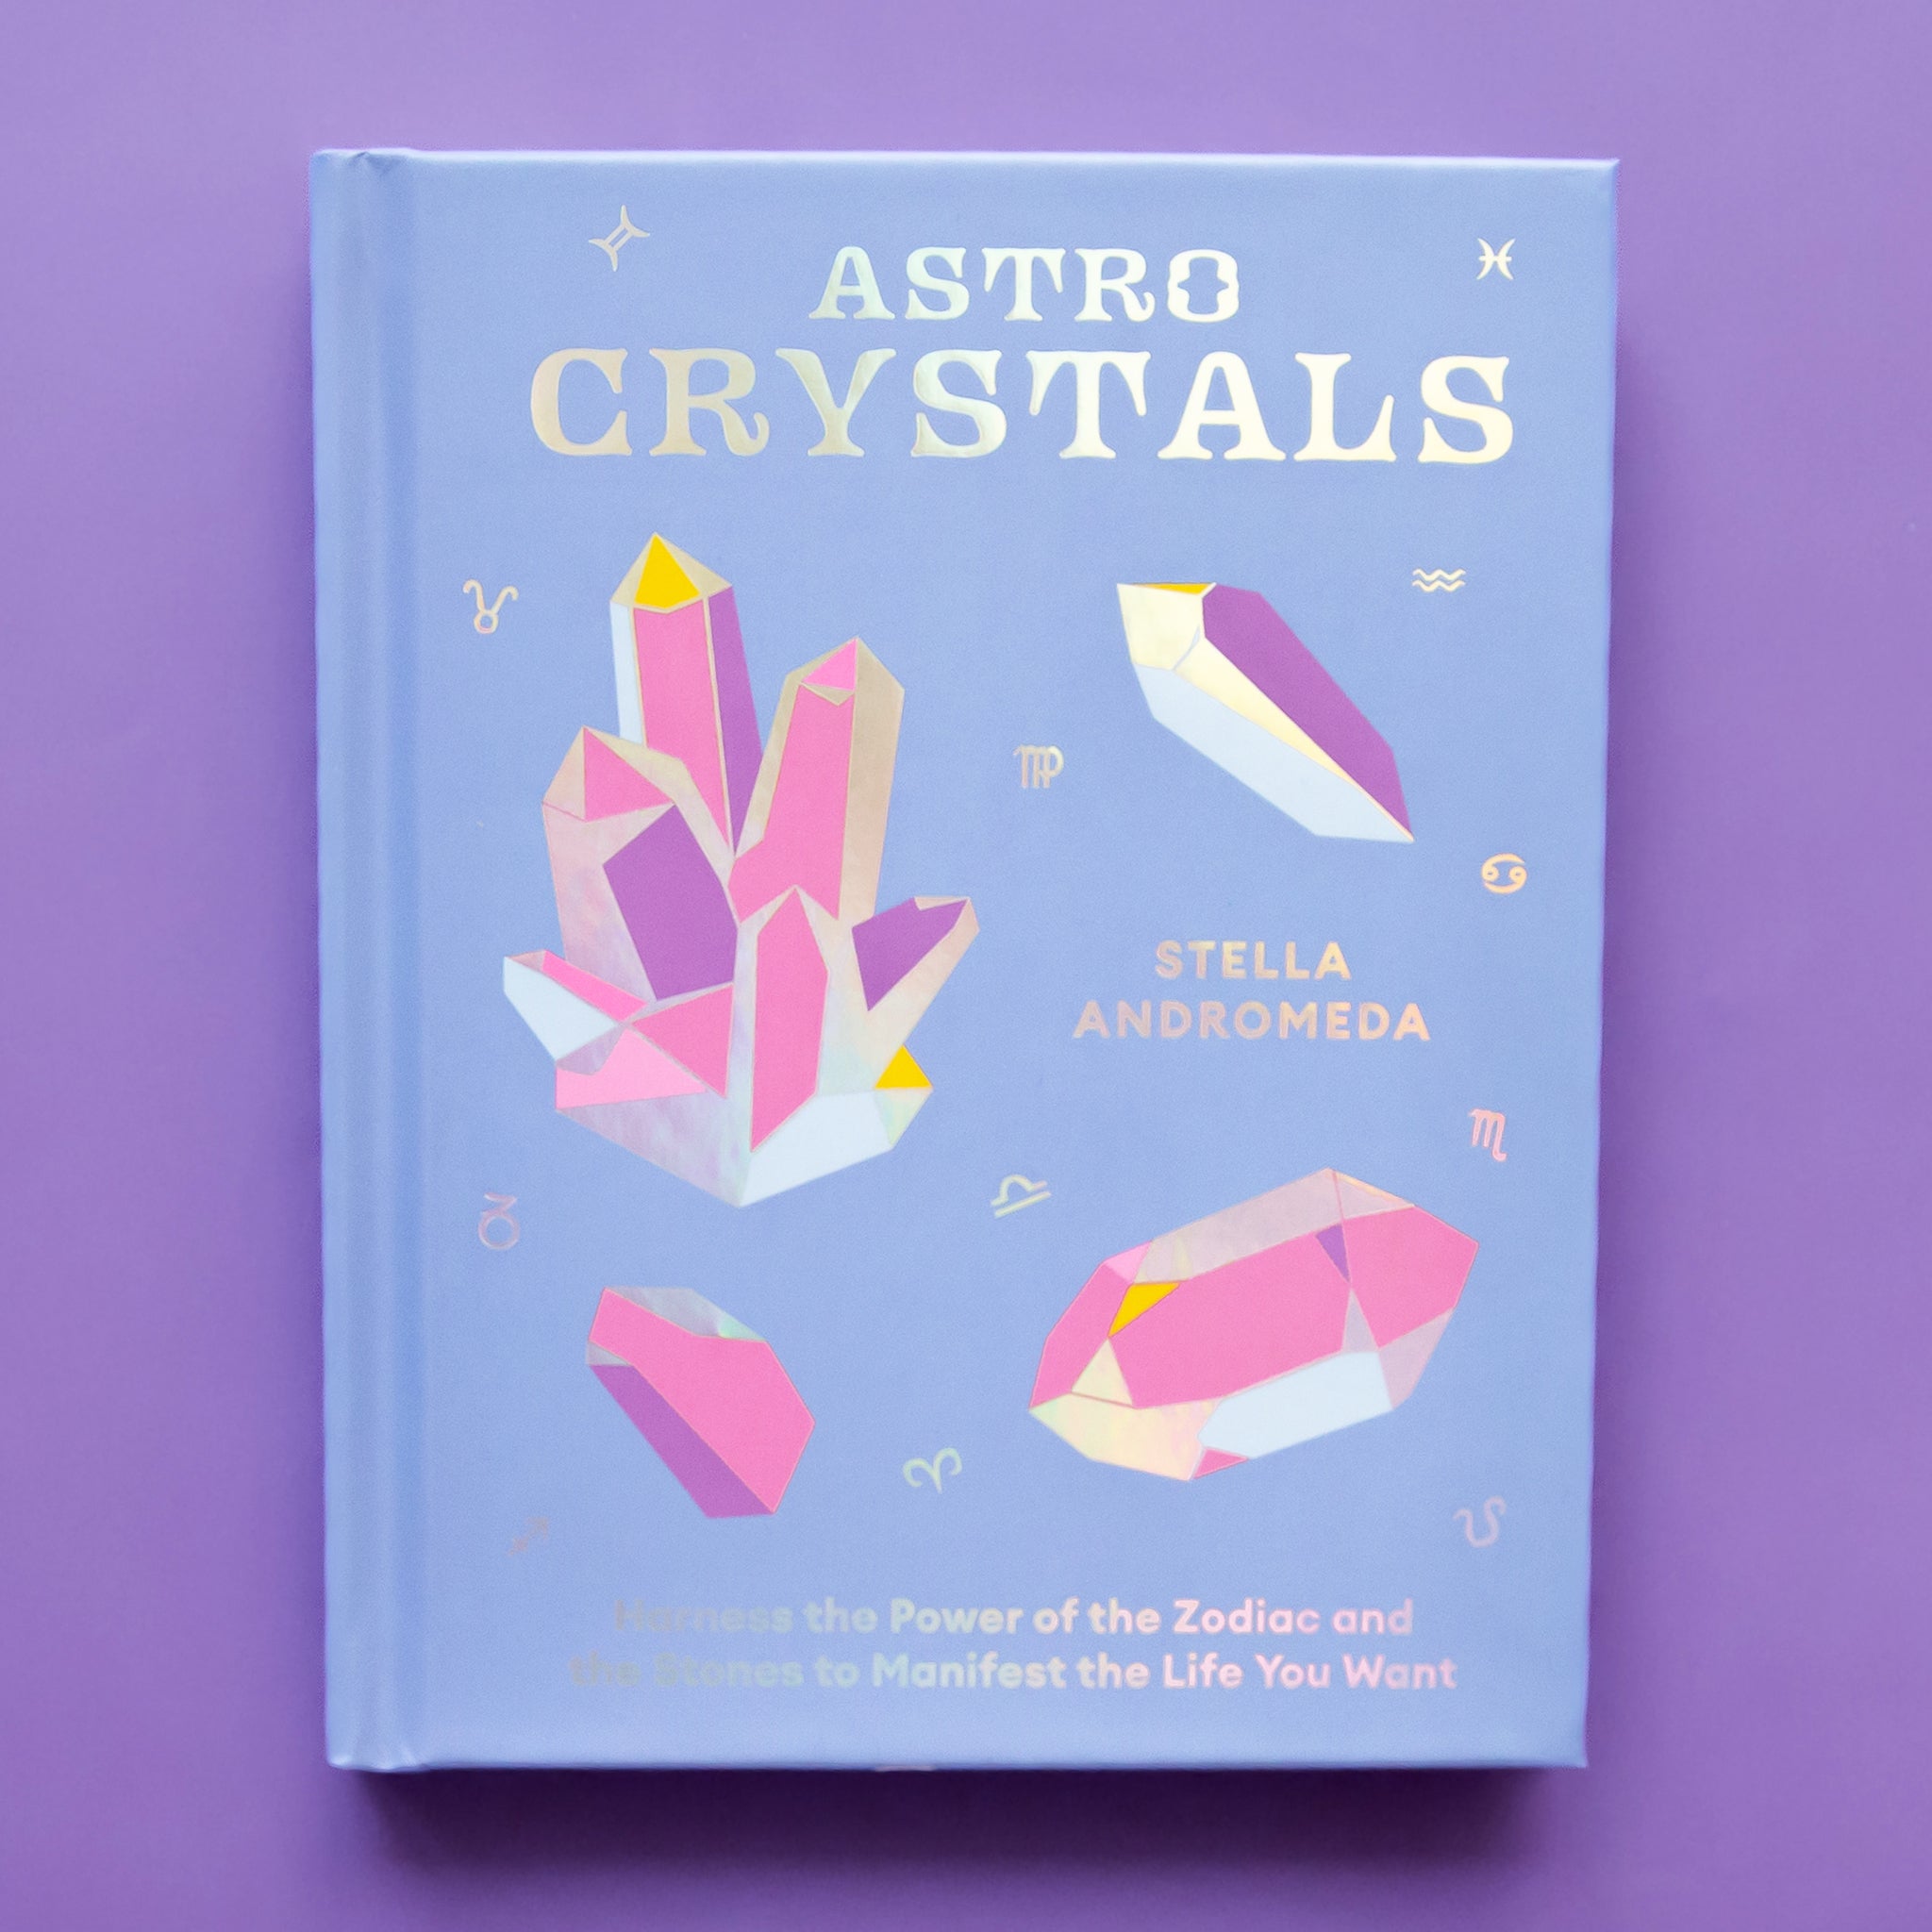 On a purple background is a periwinkle colored book cover with graphics of crystals and clusters and the title that reads, "Astro Crystals". 